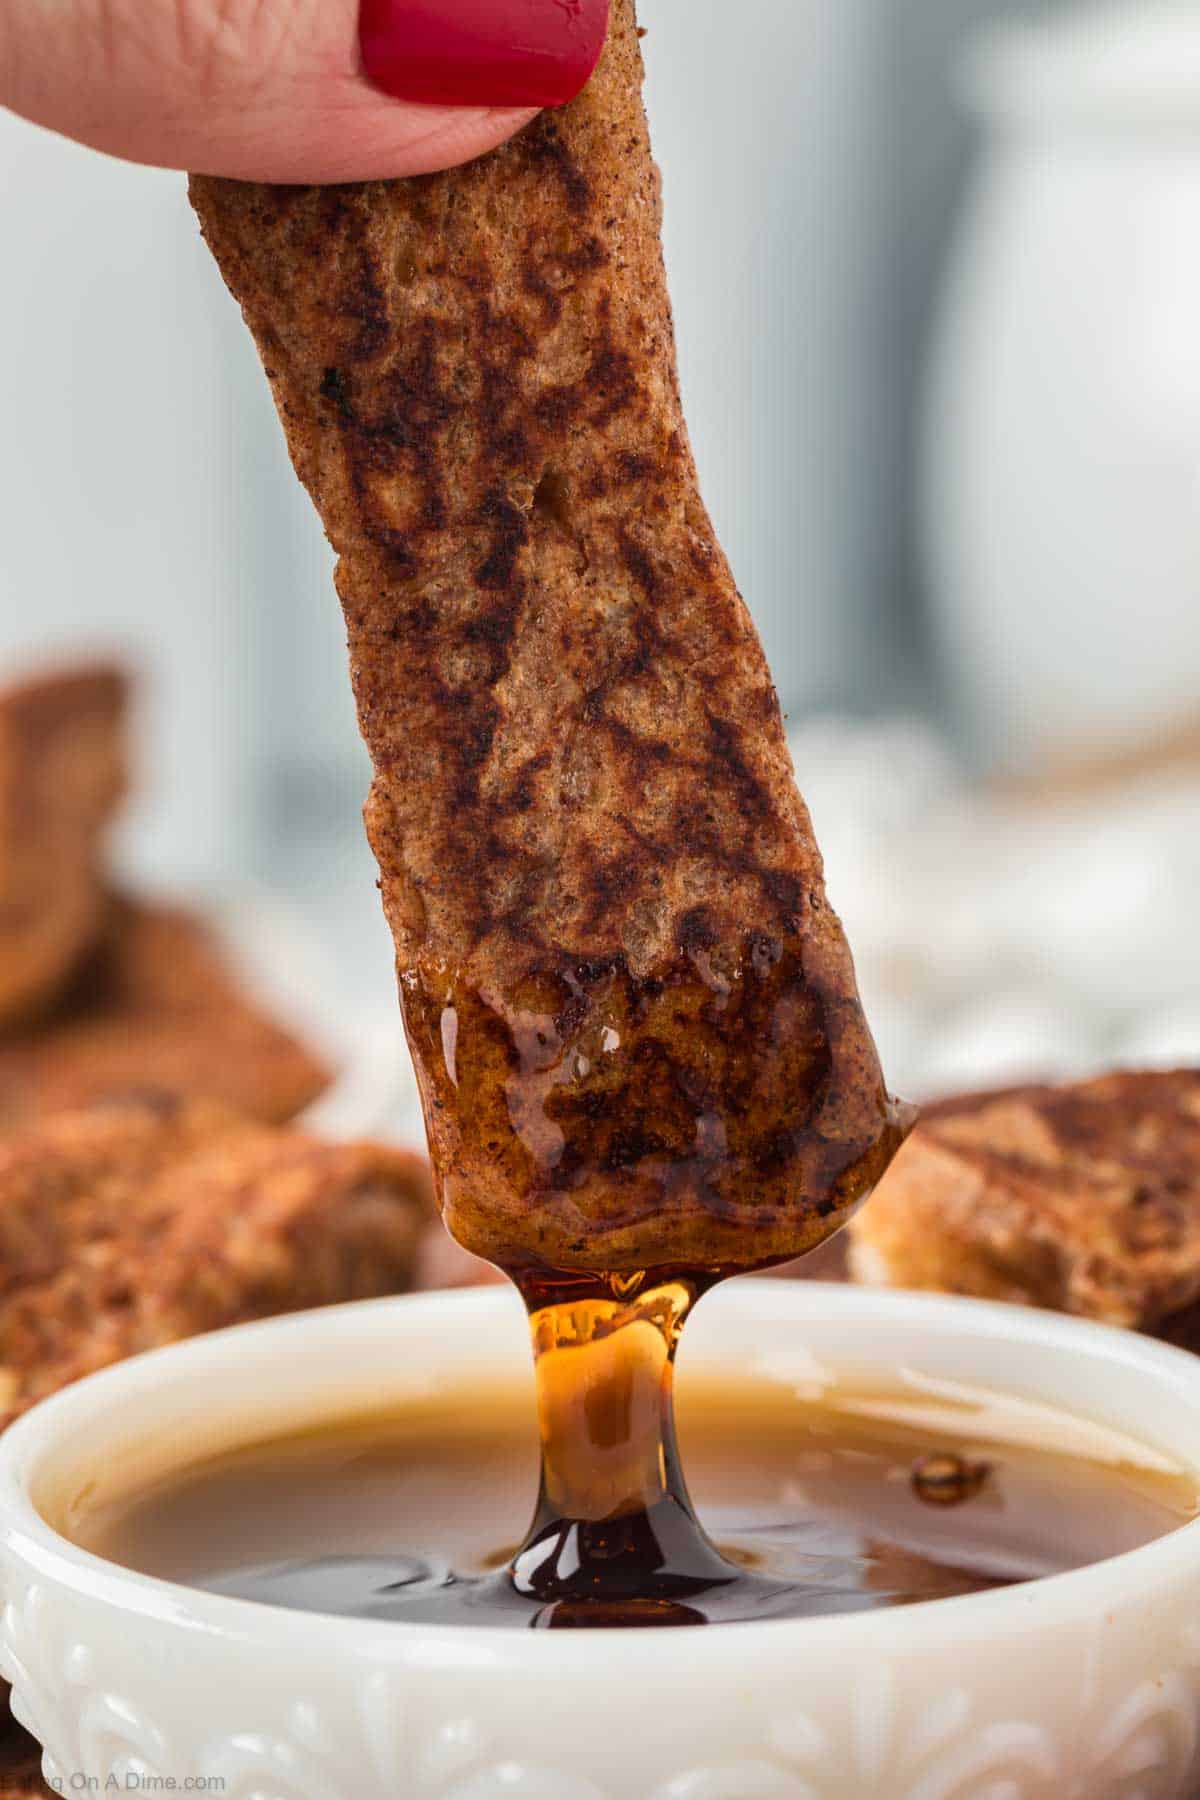 Dipping the French Toast Sticks into the maple syrup